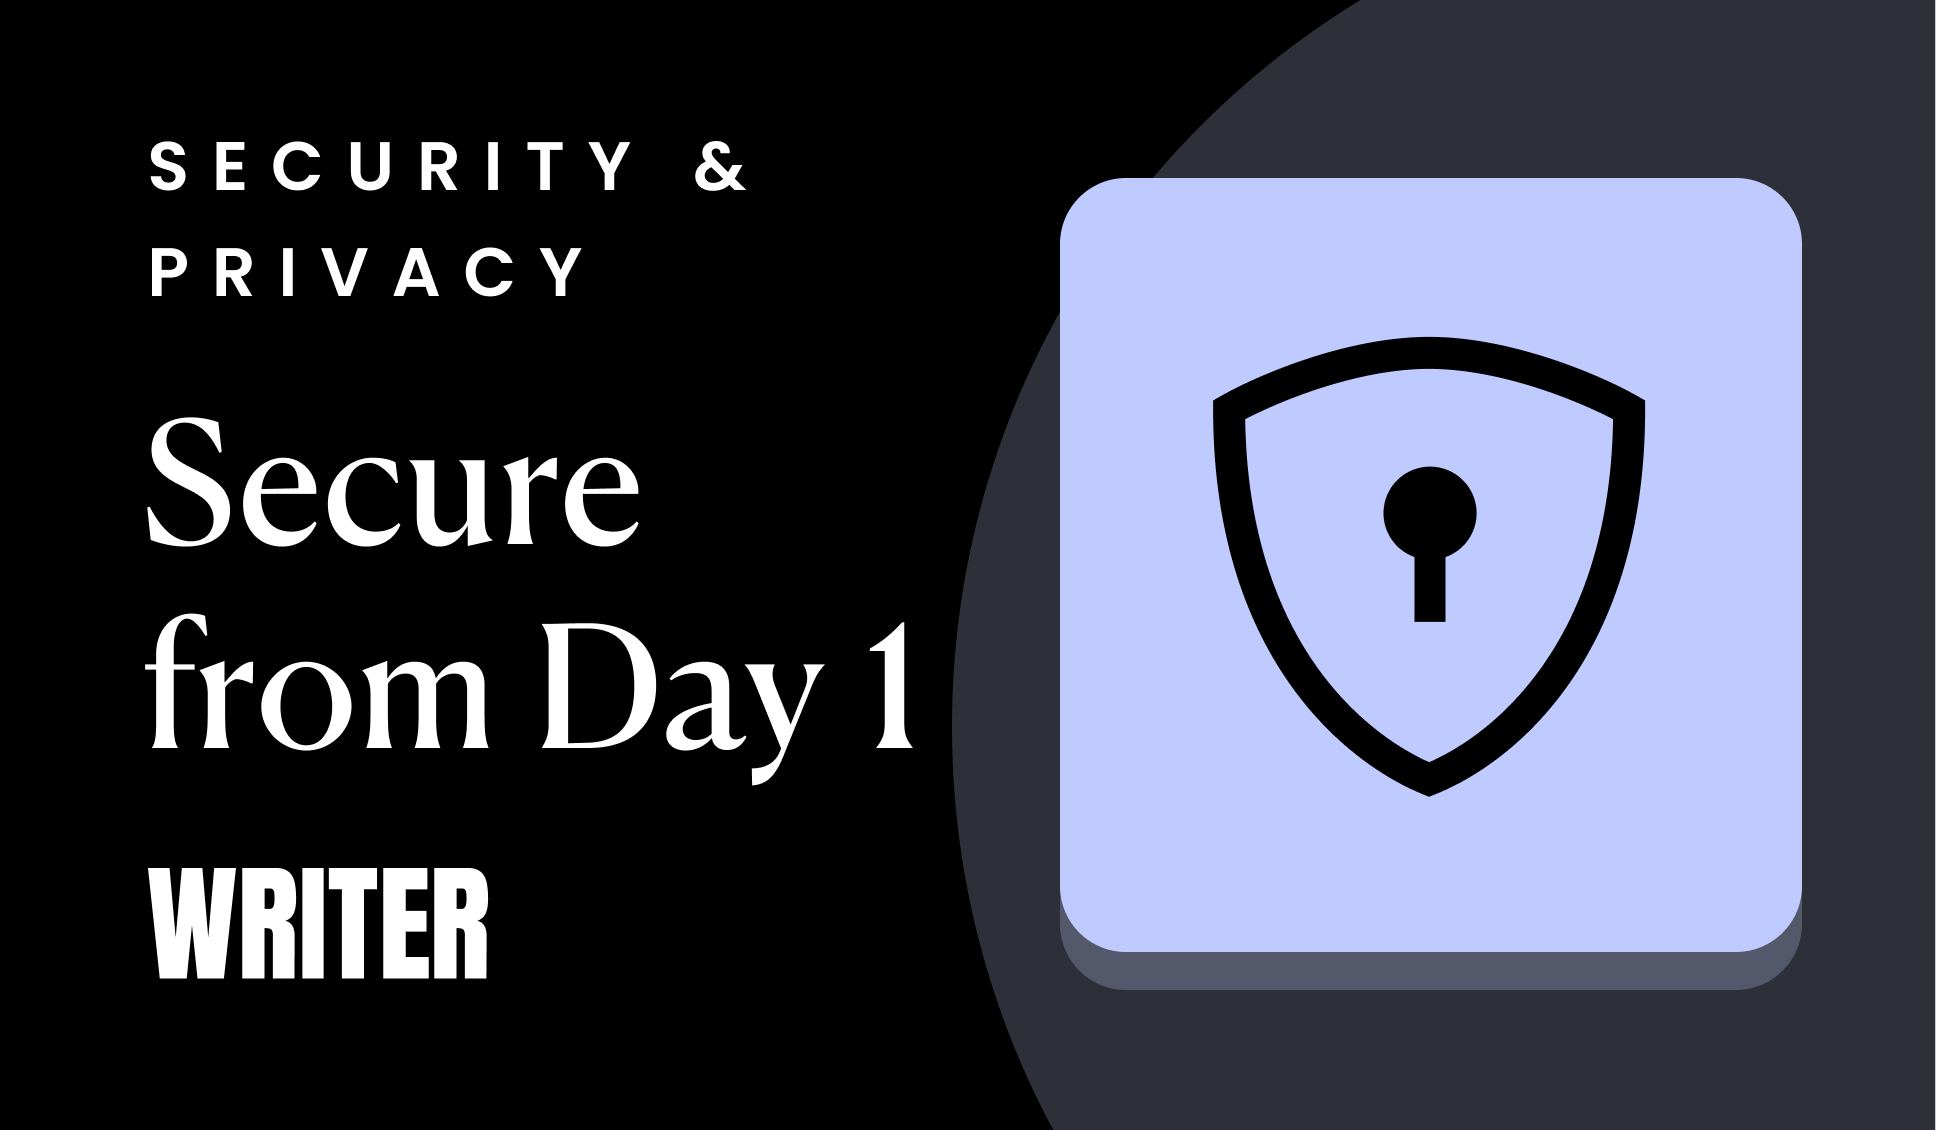 Writer: Secure from Day 1